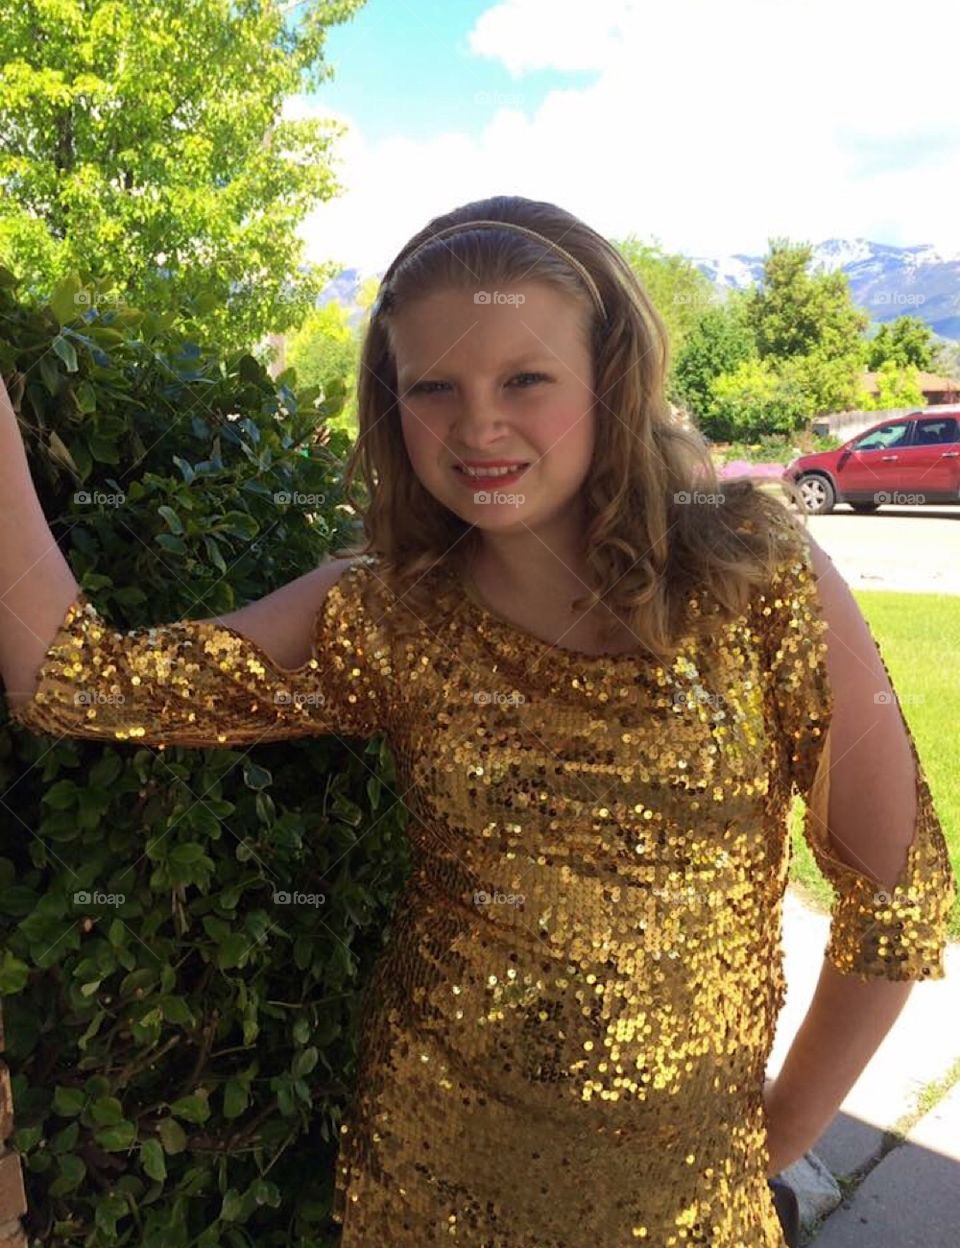 My lil’ poser in her gold sequins dance costume in the summertime.